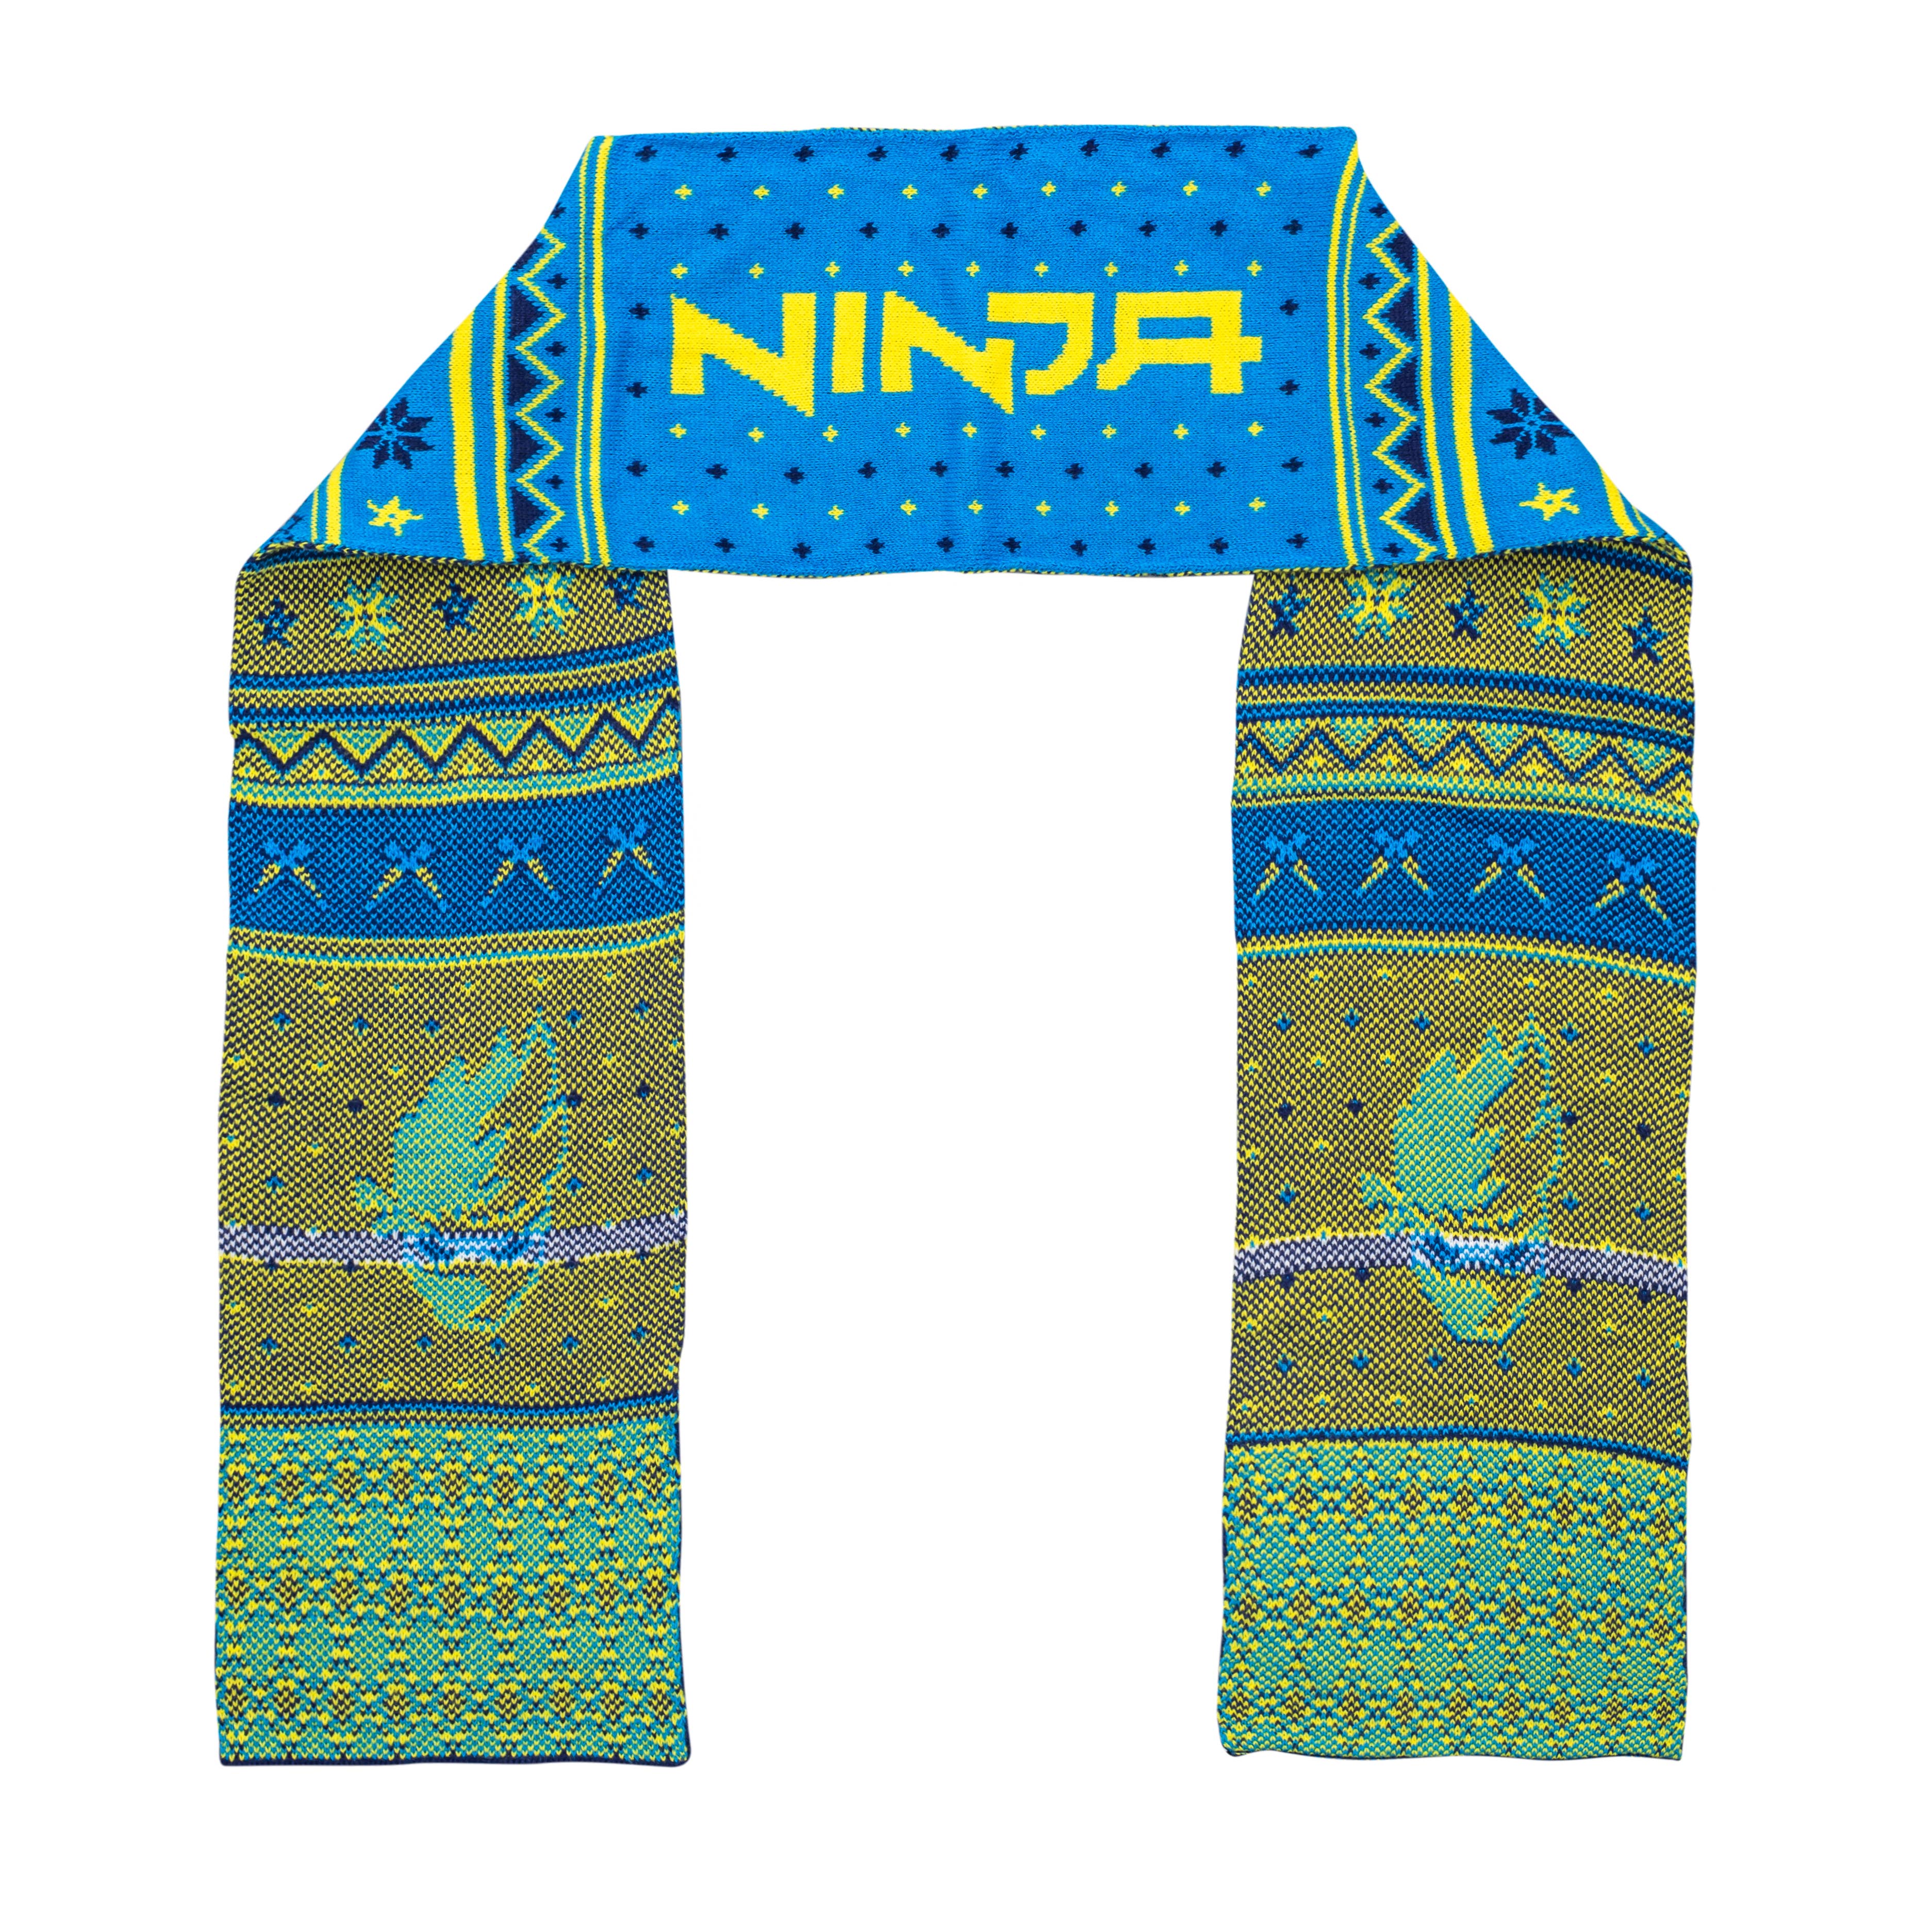 Fortnite Youth Ninja Logo Scarf – Blue/Yellow,Specials : uglyschristmassweater.com